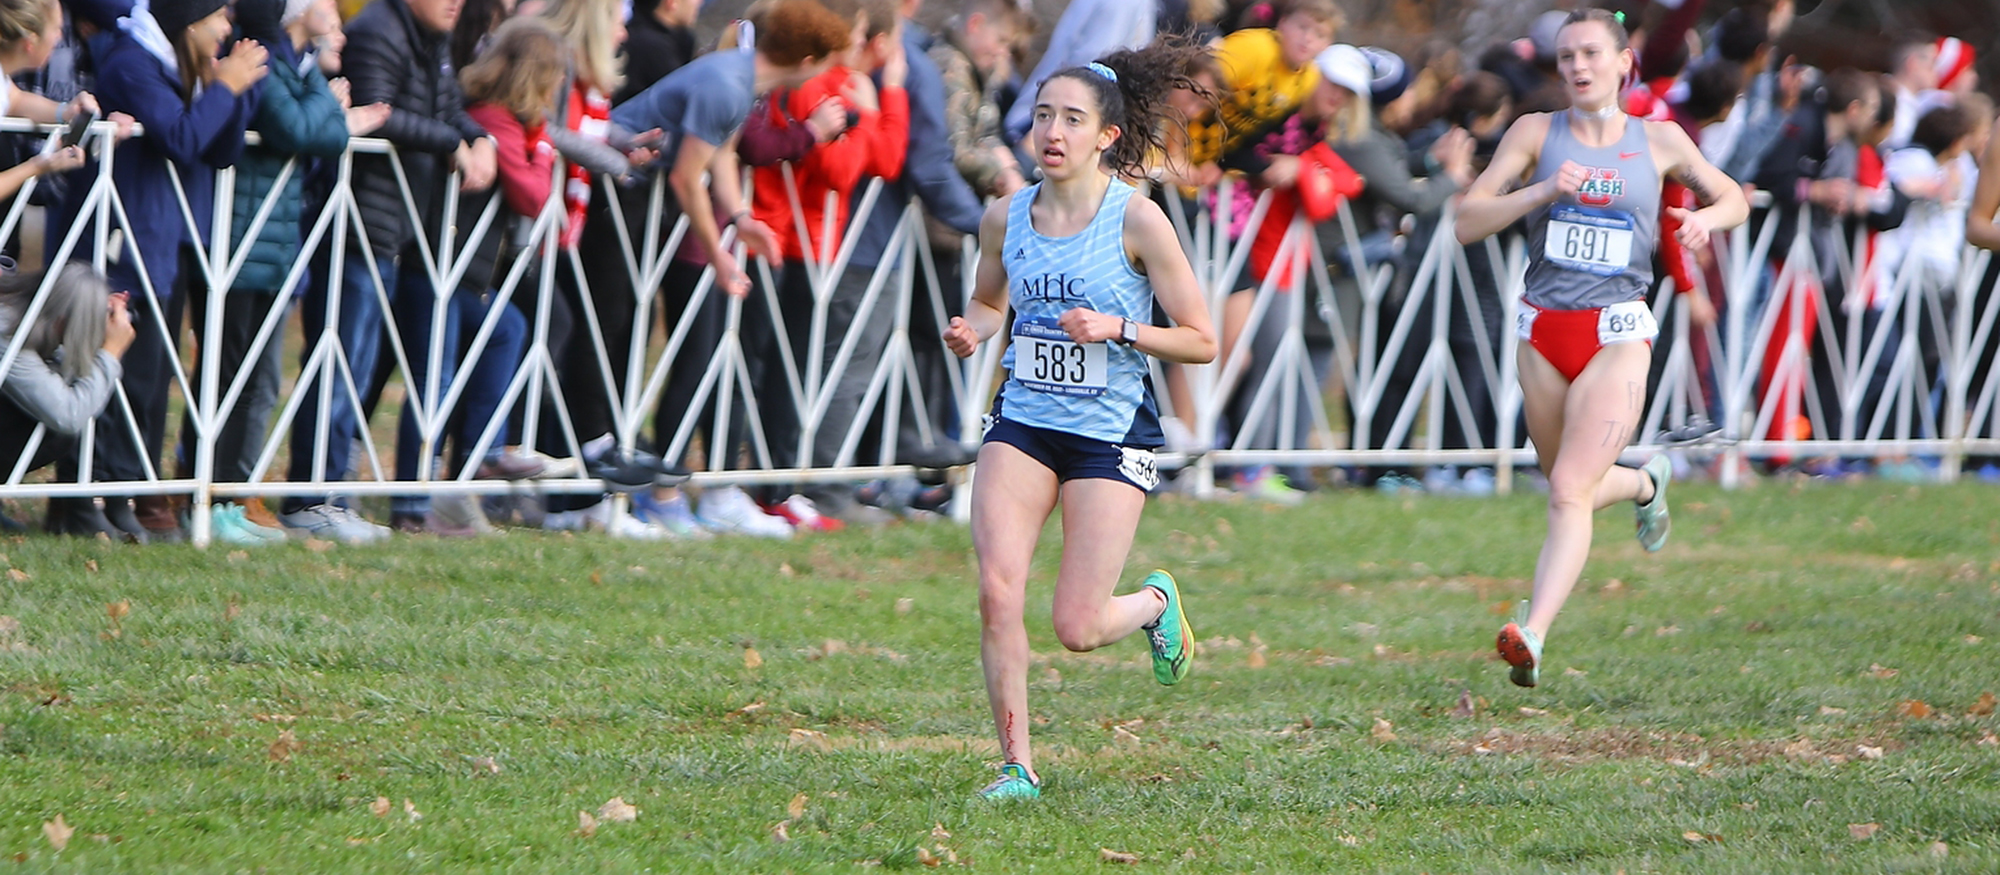 Selkin Brings Strong Performance to NCAA Division III Cross Country Championships